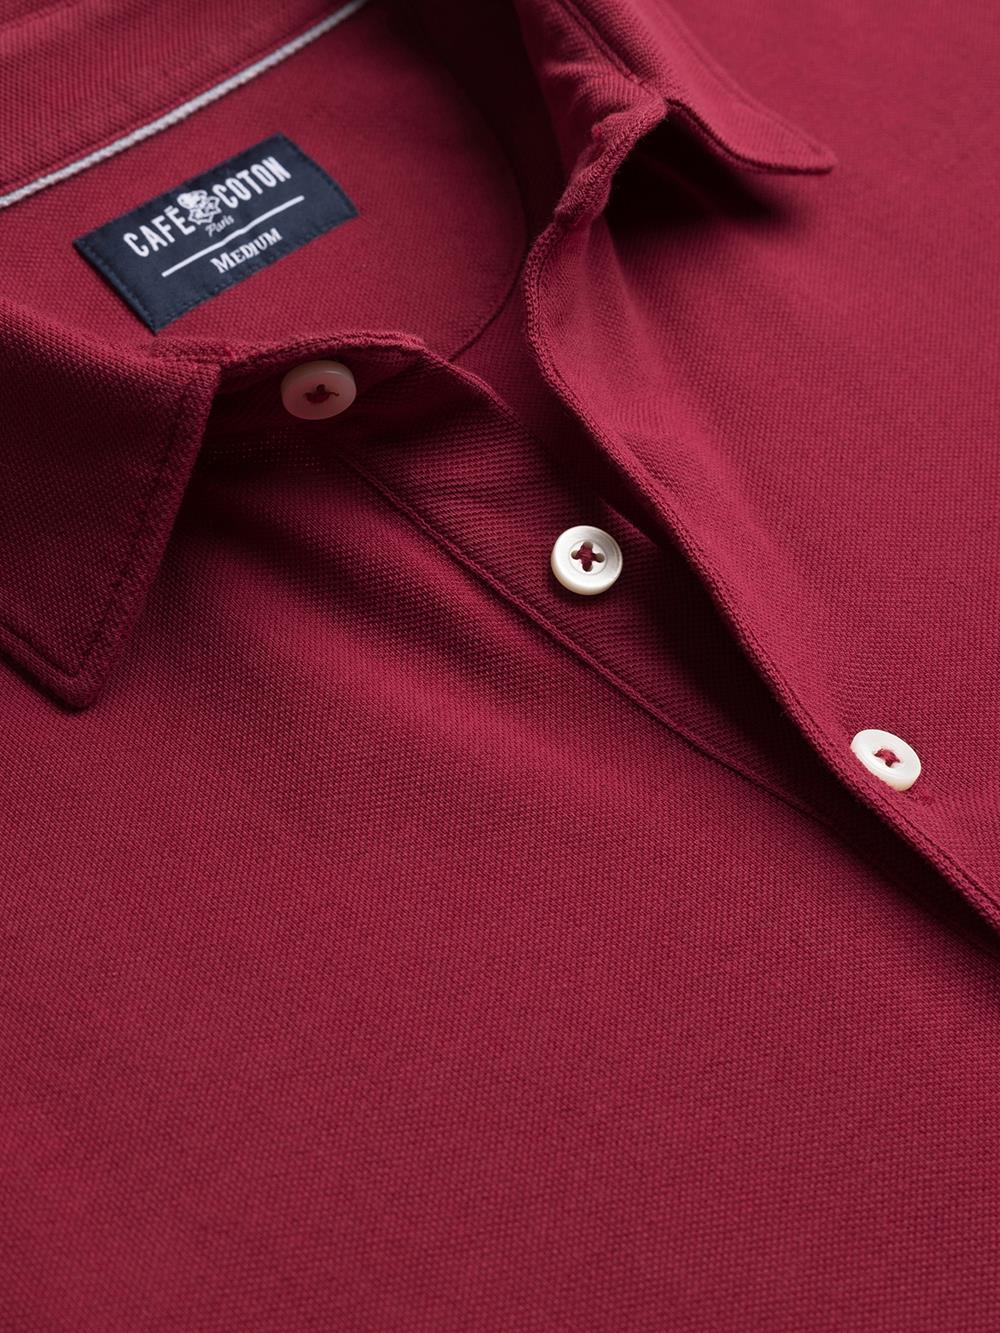 Heritage Polo in red piqué